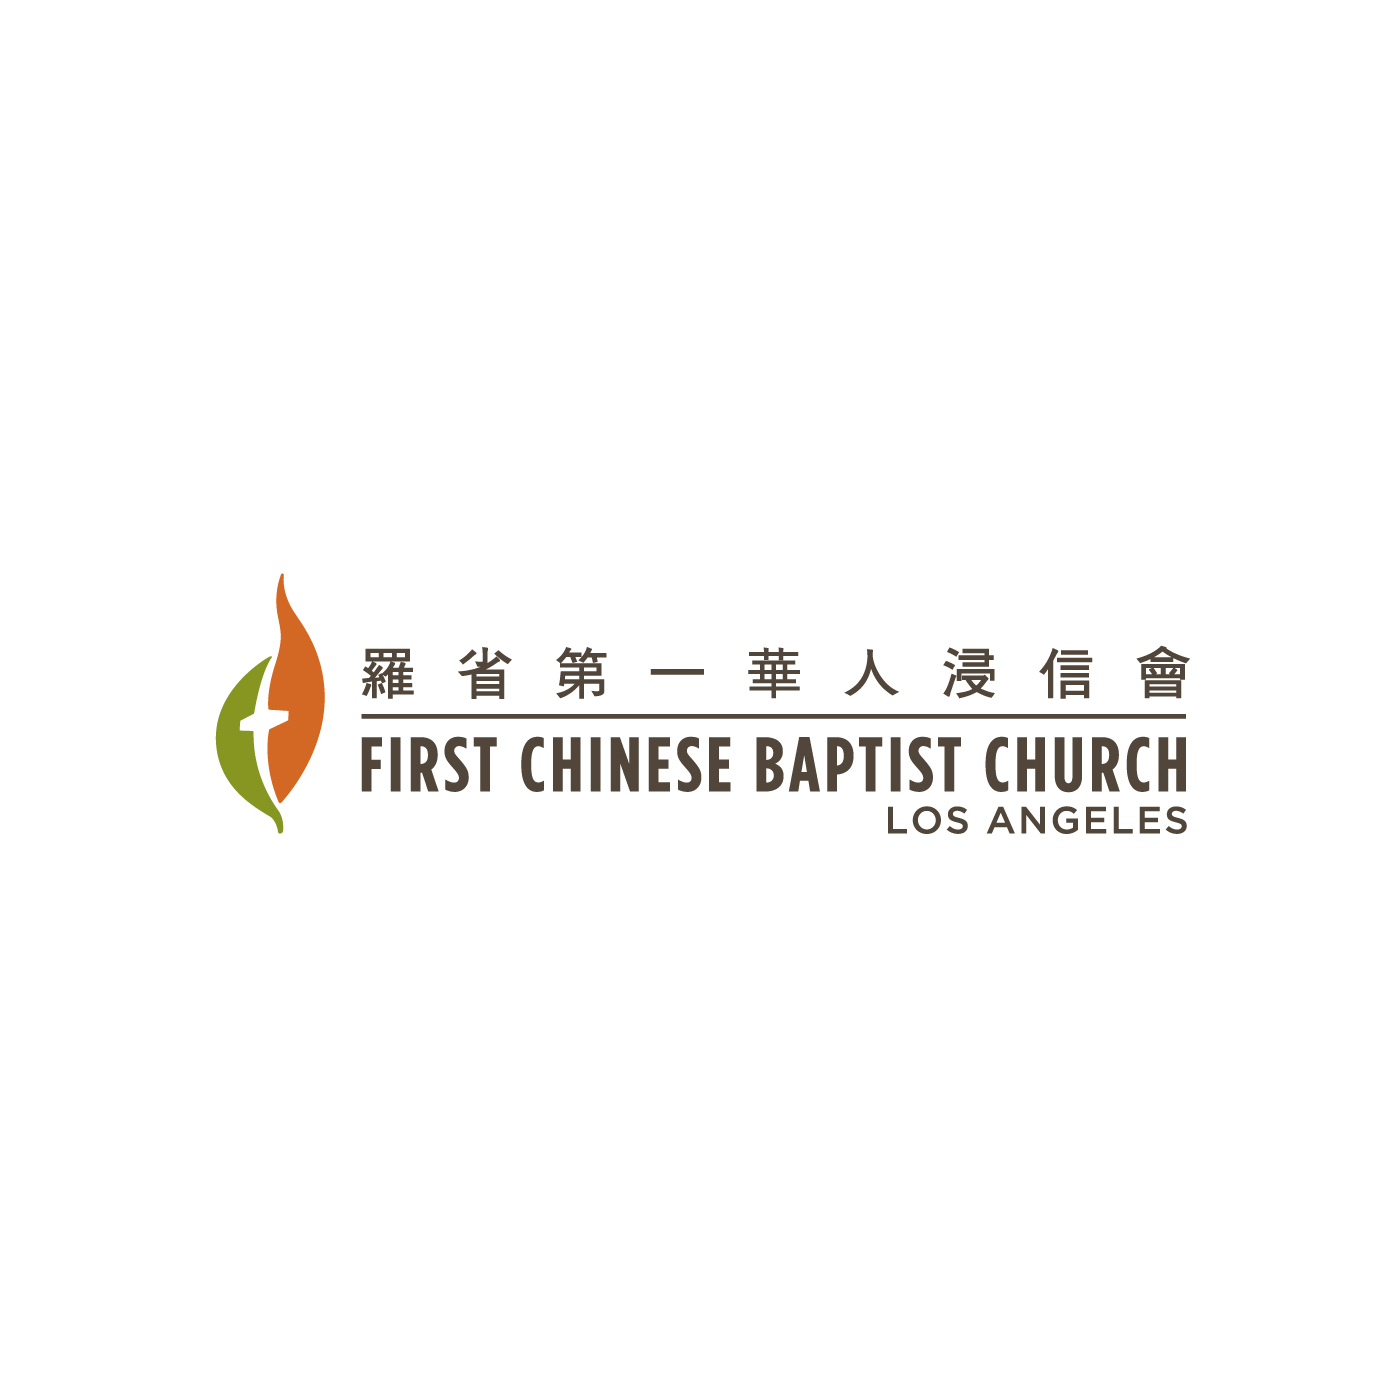 First Chinese Baptist Church Los Angeles